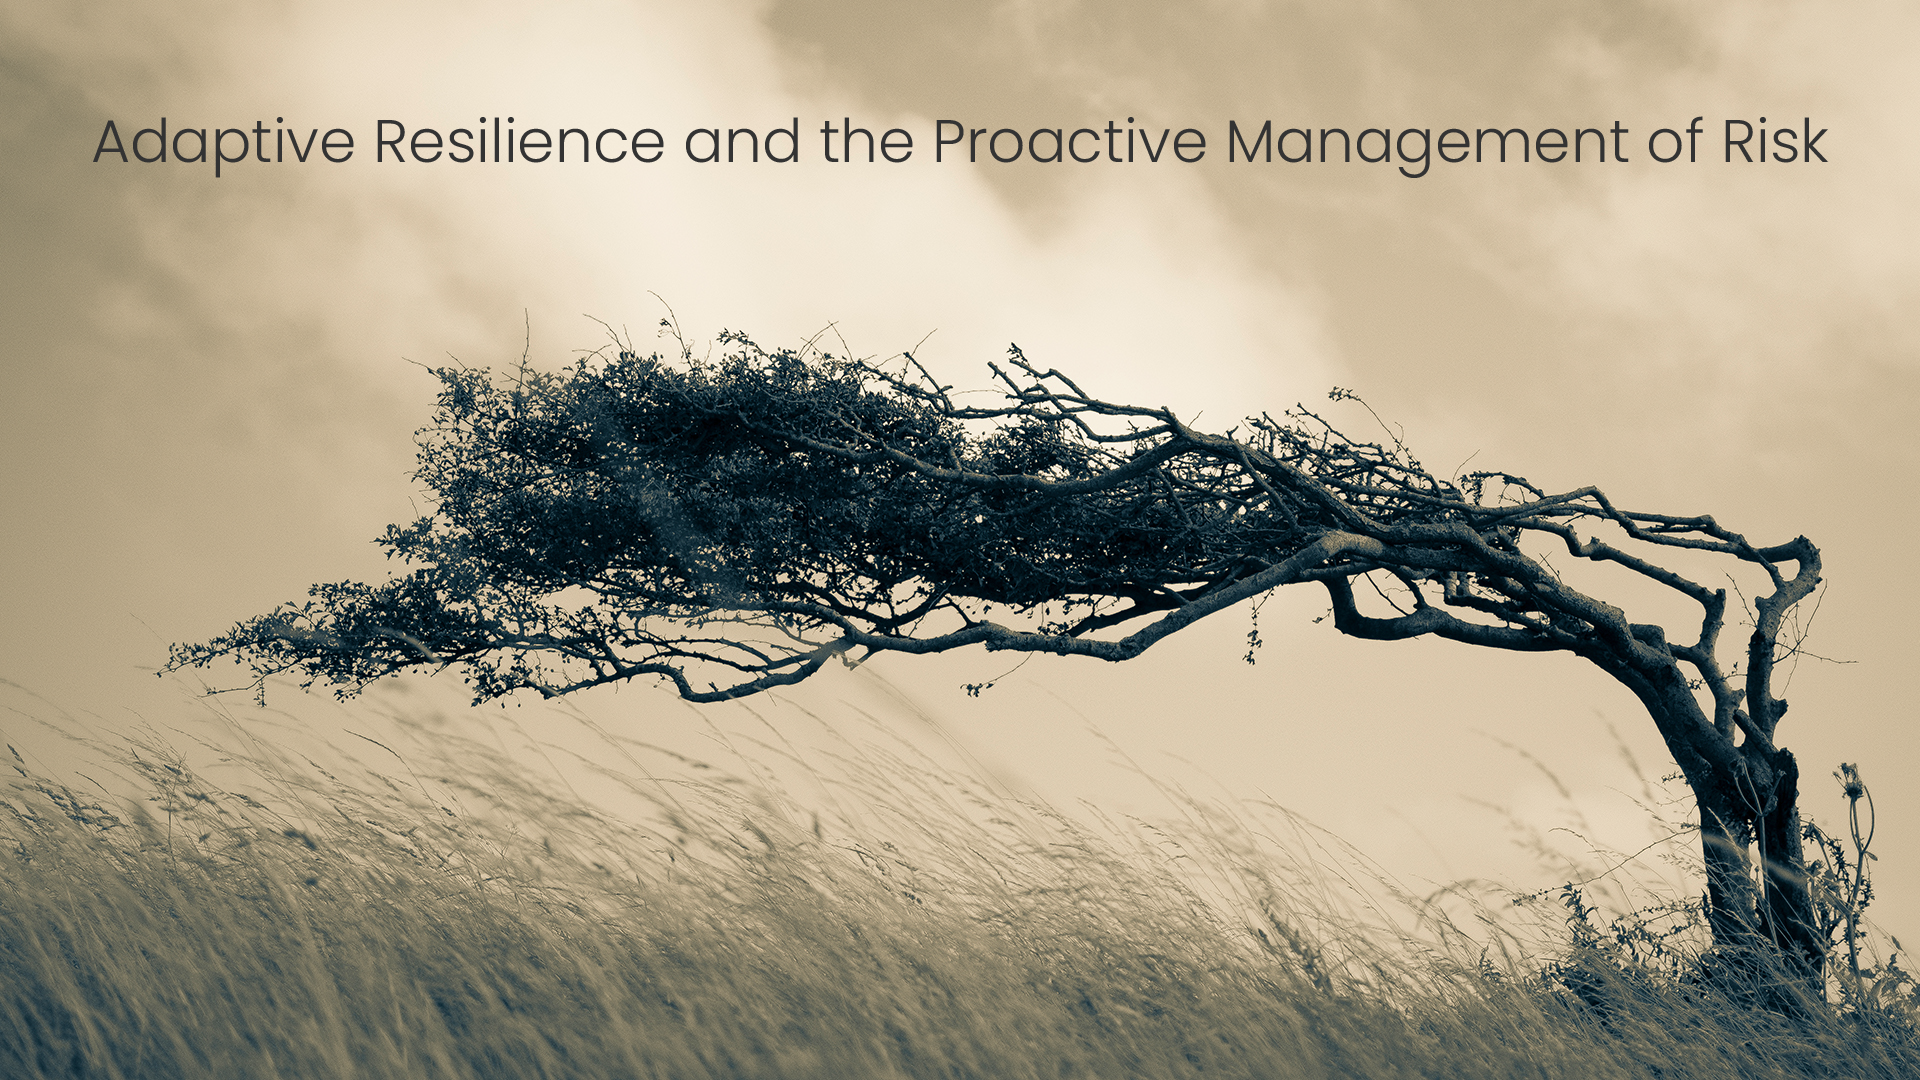 Adaptive Resilience and the Proactive Management of Risk